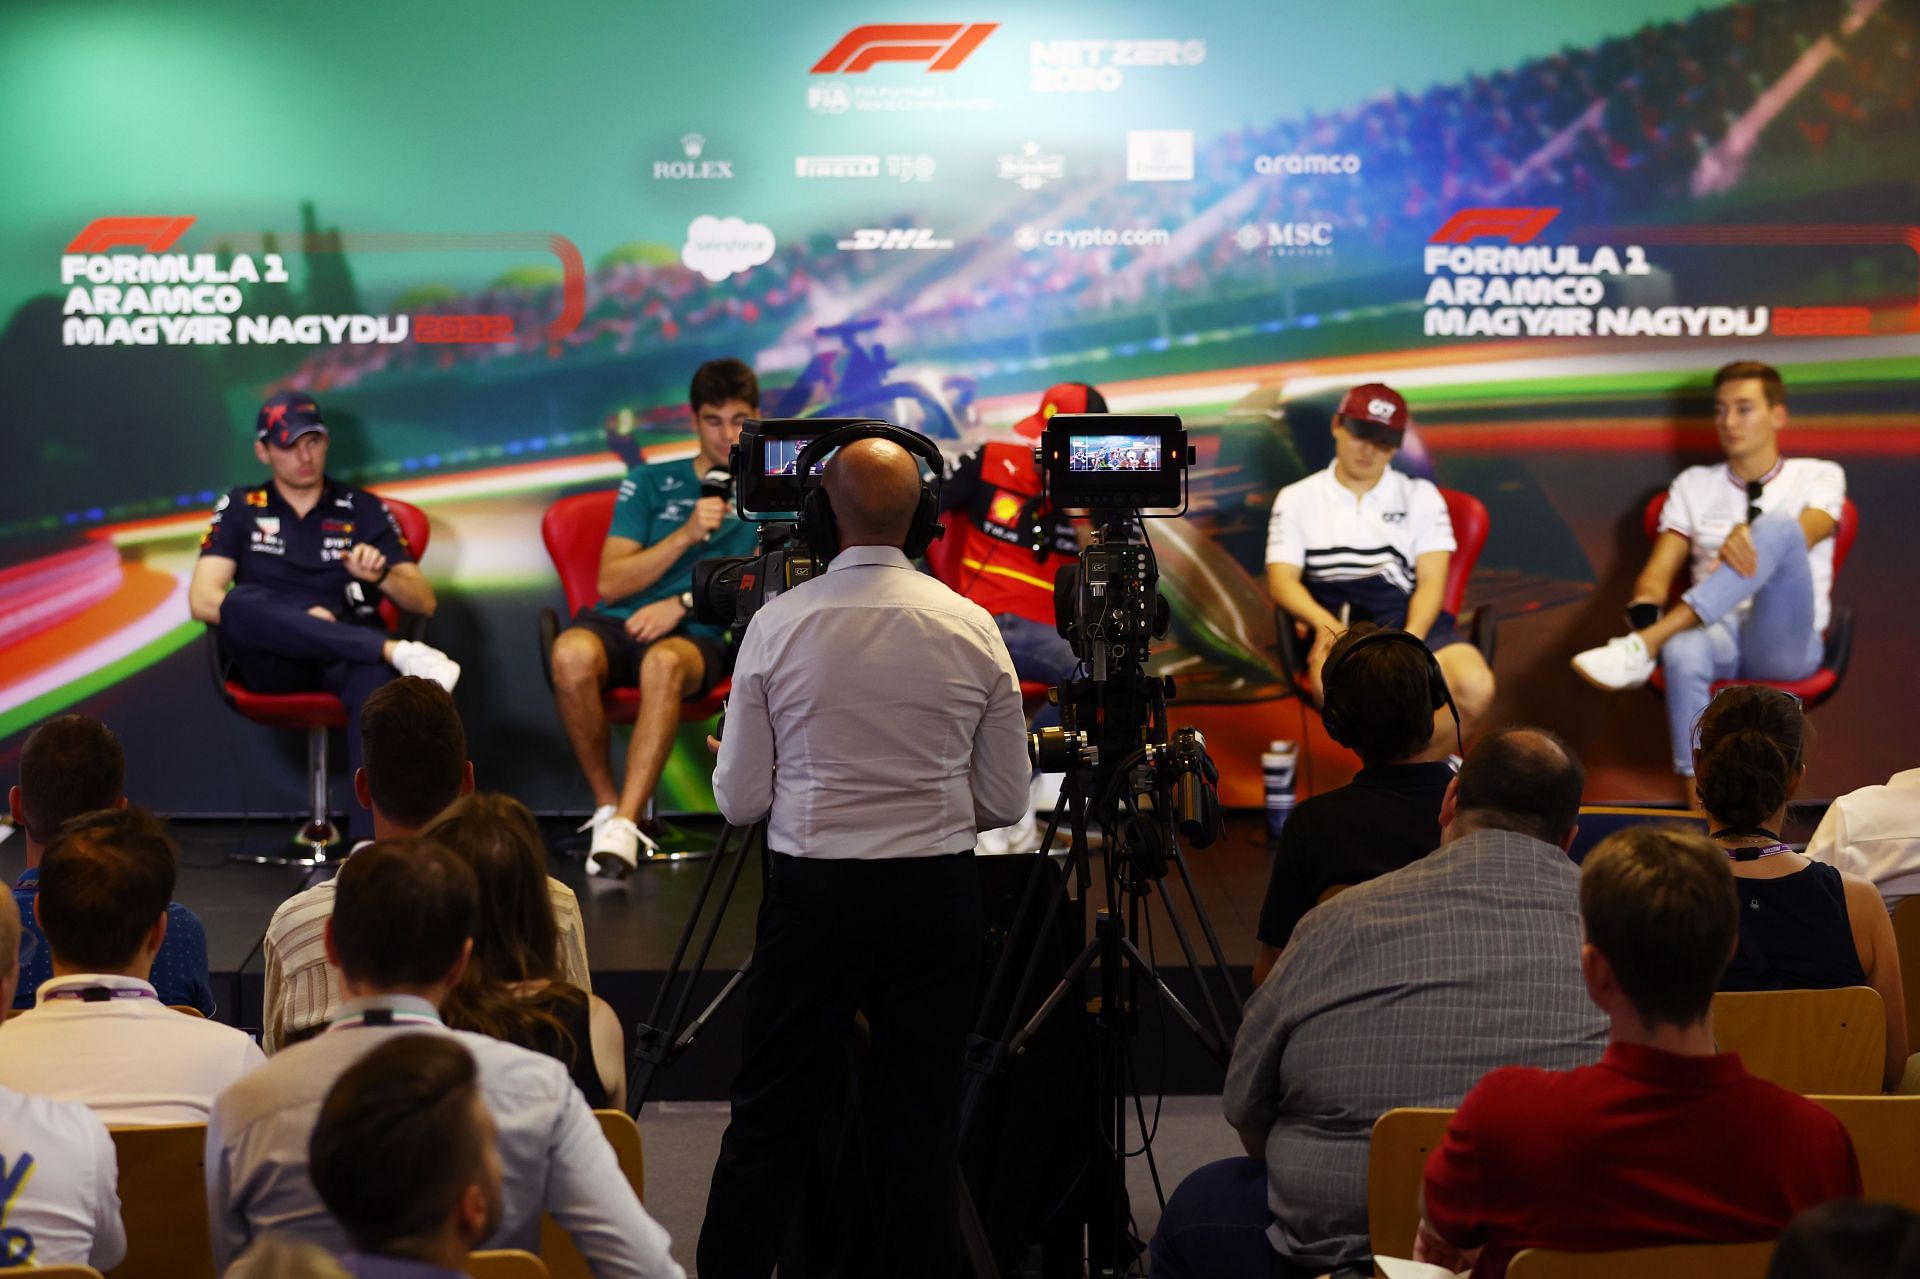 A view of the camera operator in the Drivers Press Conference during previews ahead of the F1 Grand Prix of Hungary at Hungaroring on July 28, 2022 in Budapest, Hungary. (Photo by Bryn Lennon/Getty Images)